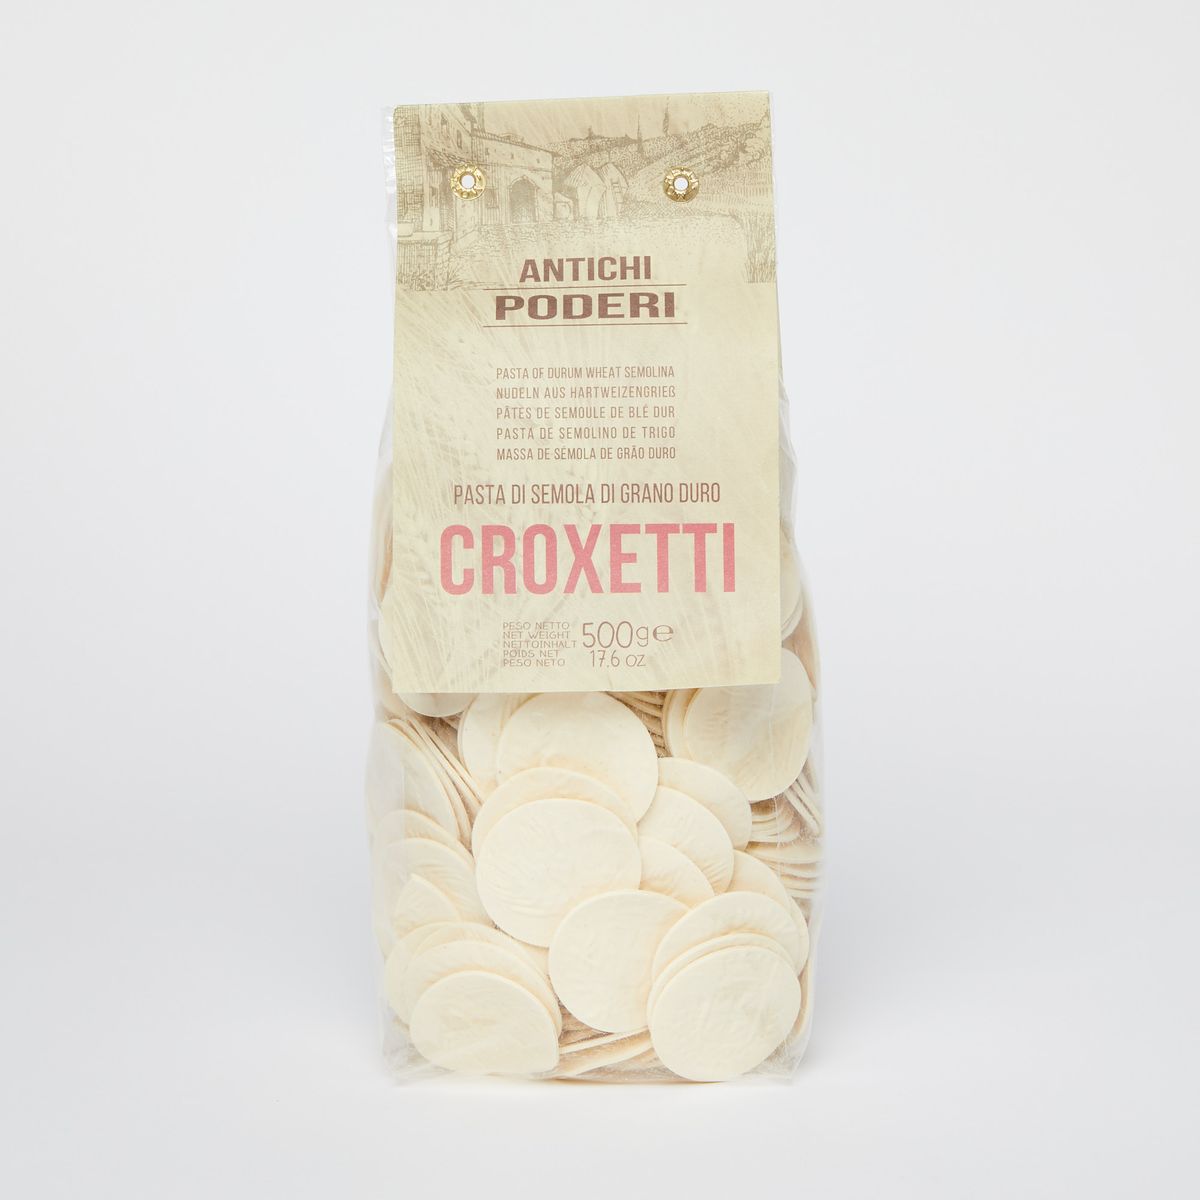 Clear plastic bag of disc-shaped pasta with a tan label that reads "Croxetti" in pink